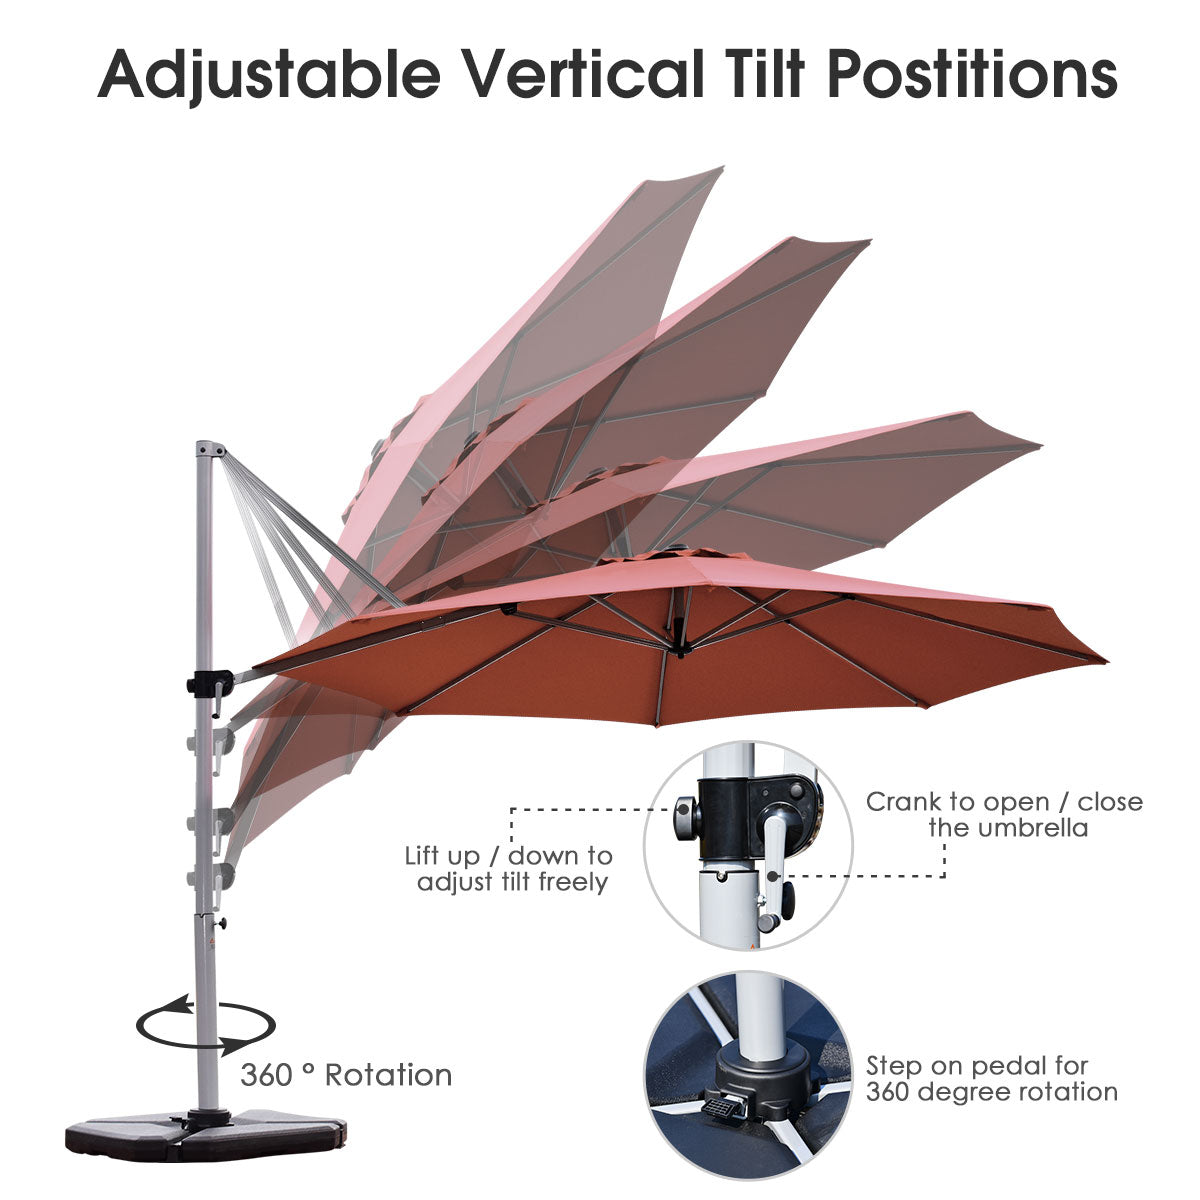 3.3m Patio Cantilever Umbrella with Tilting Adjustment and Cross base-Brick Red